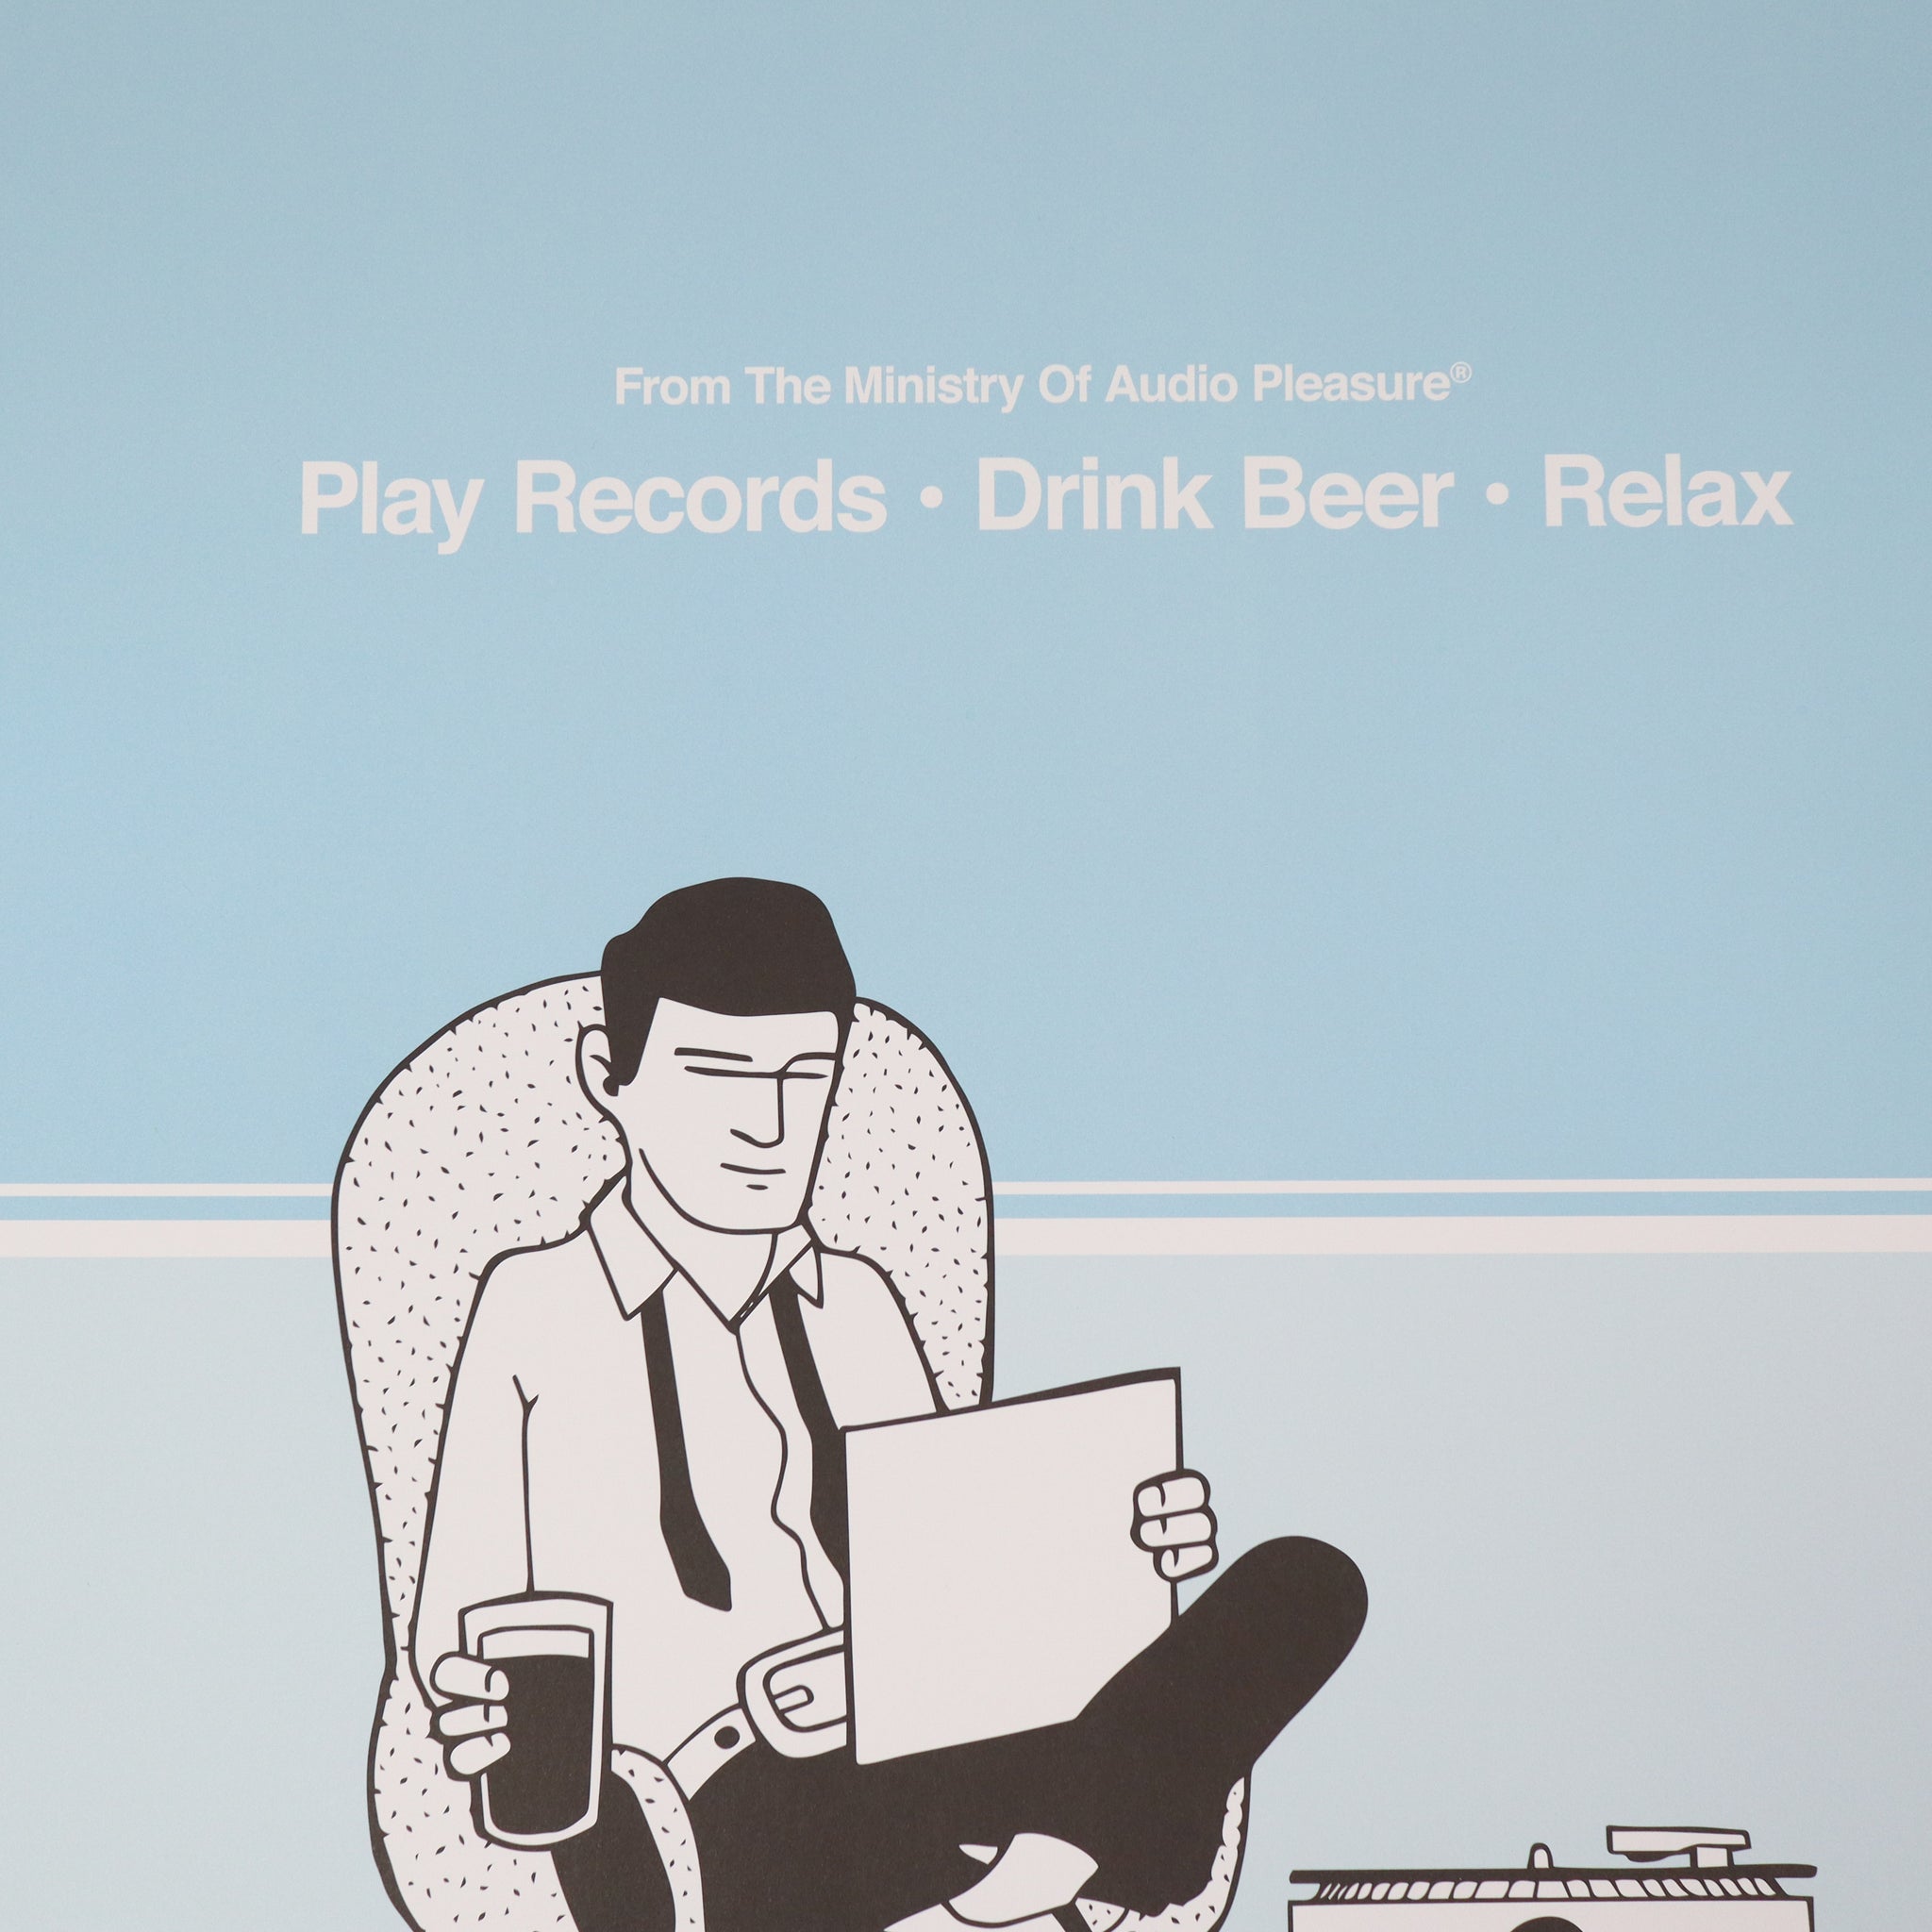 Play Records - Drink Beer - Relax